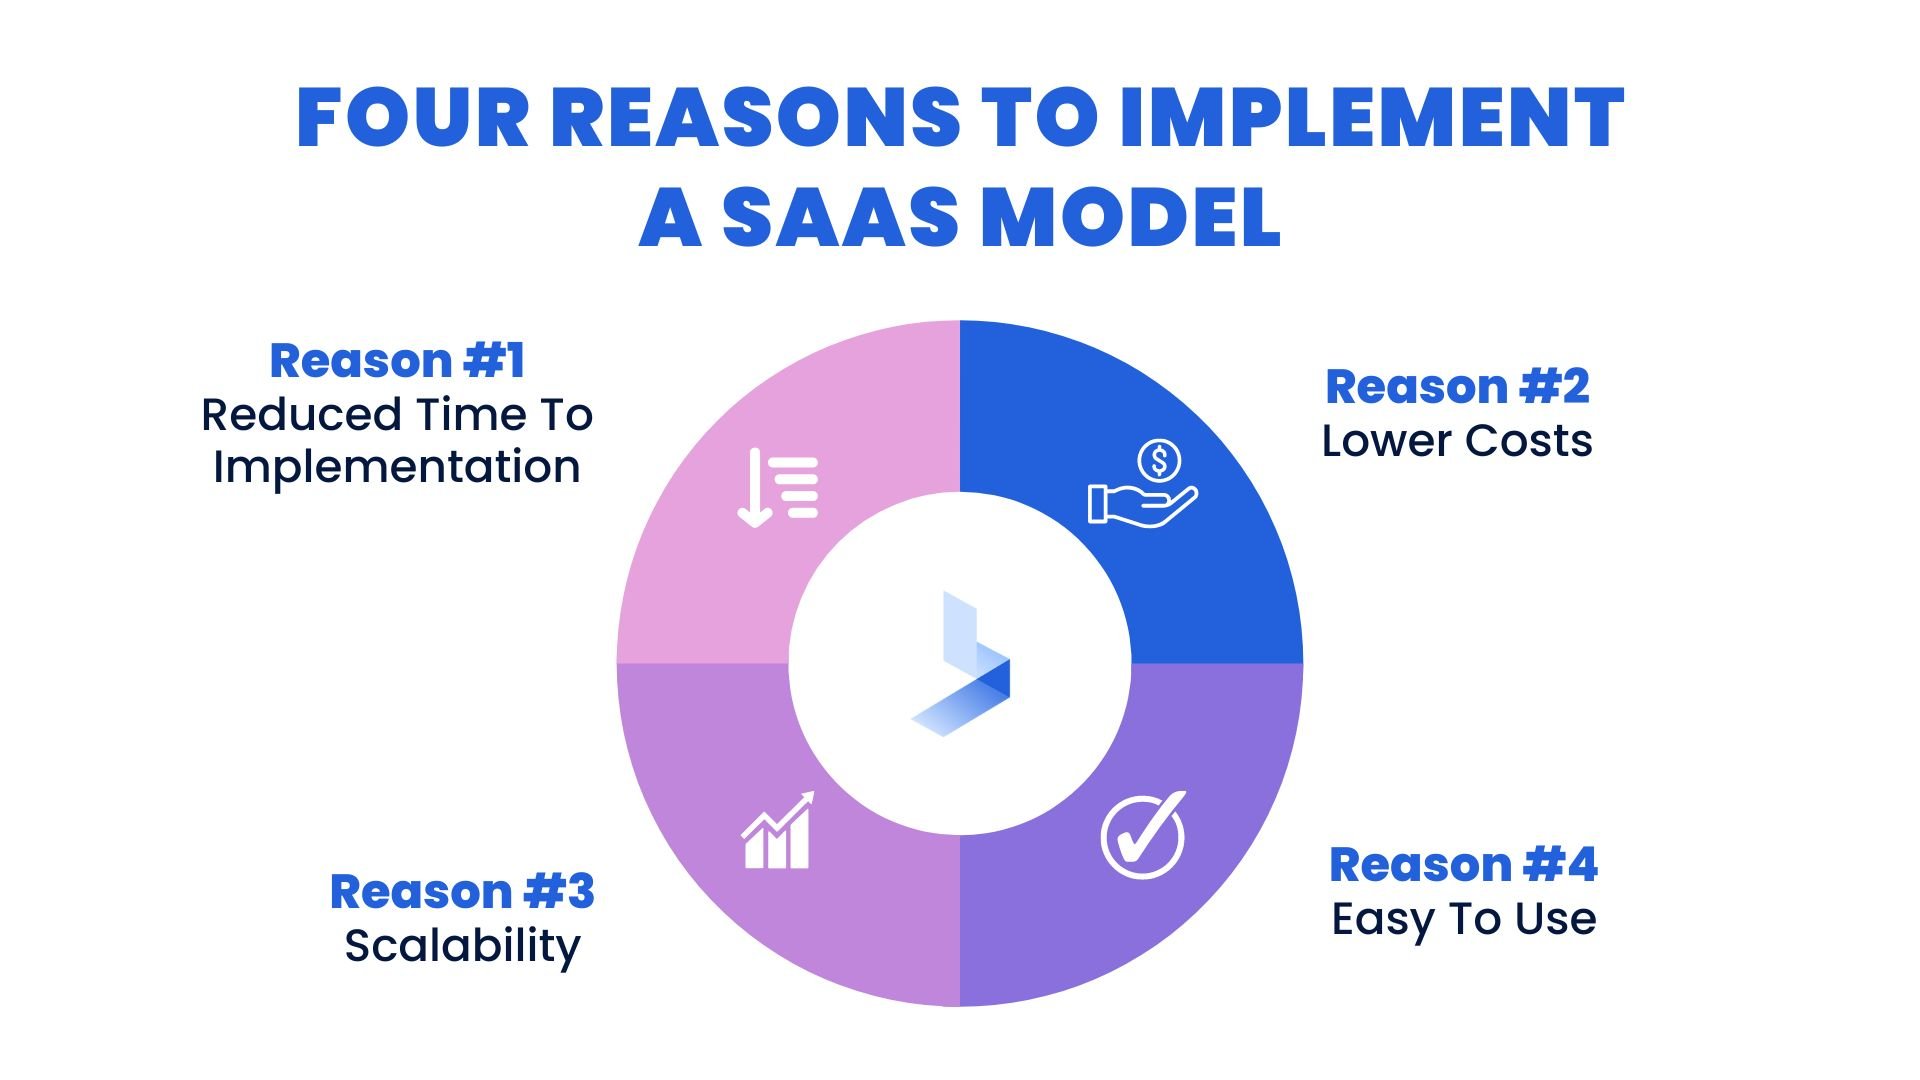 Benefits of a SaaS Model